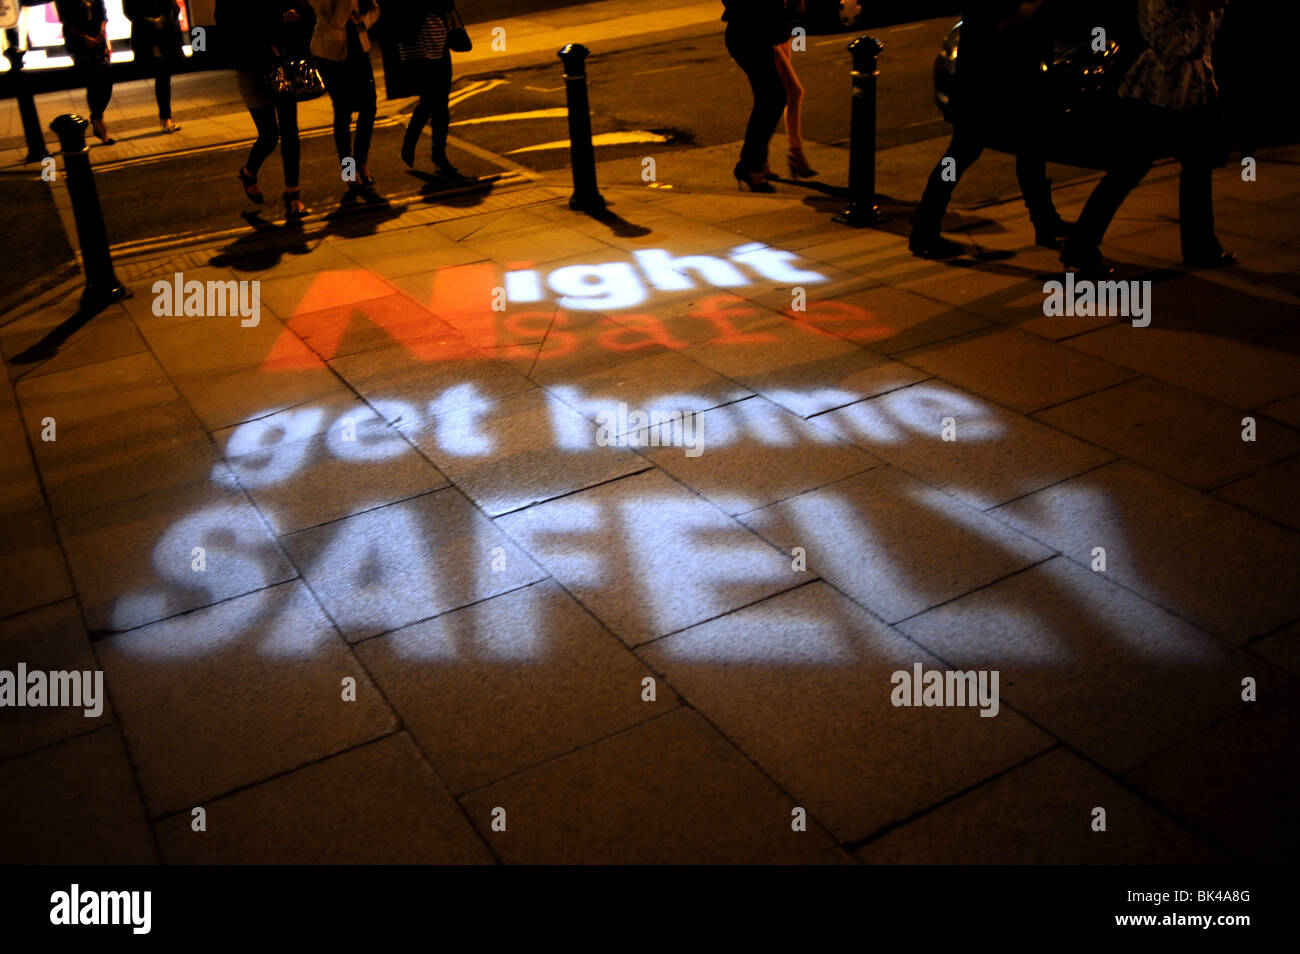 Night Safe Get Home Safely police signs beamed on to the street in Harrogate Yorkshire UK Stock Photo